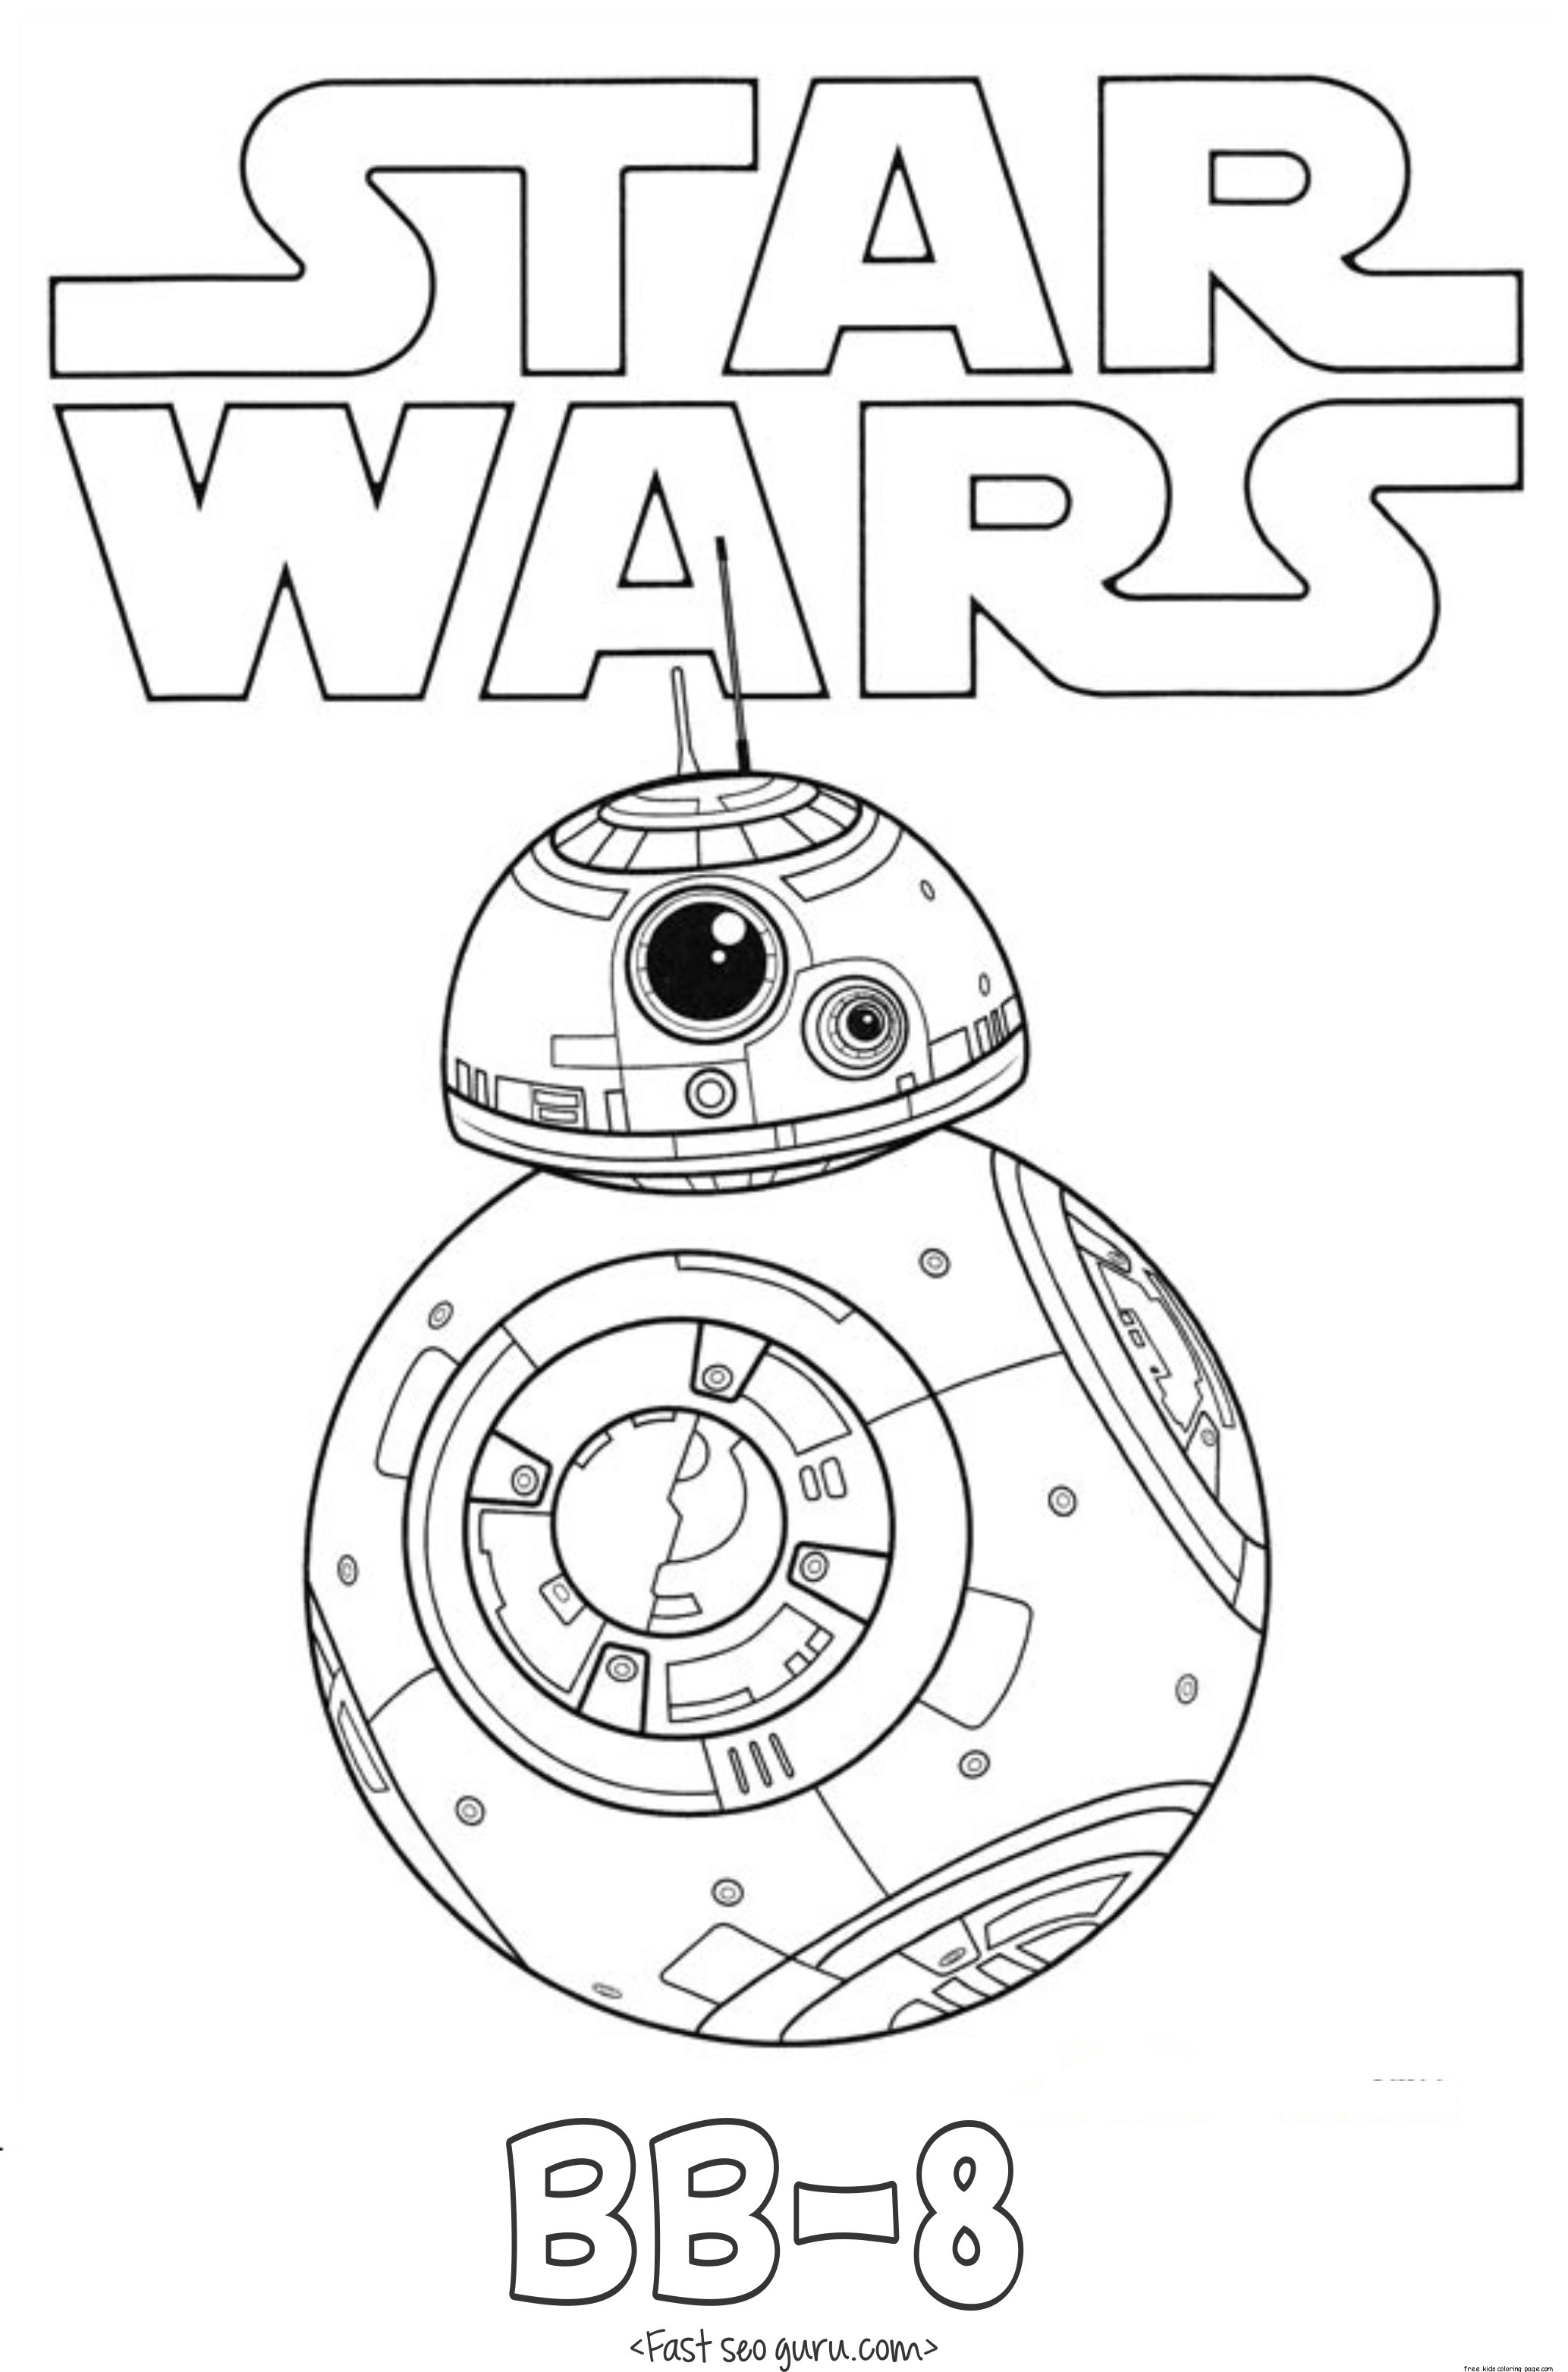 Download Star Wars The Force Awakens BB 8 coloring pages - Free Printable Coloring Pages For Kids.Free ...